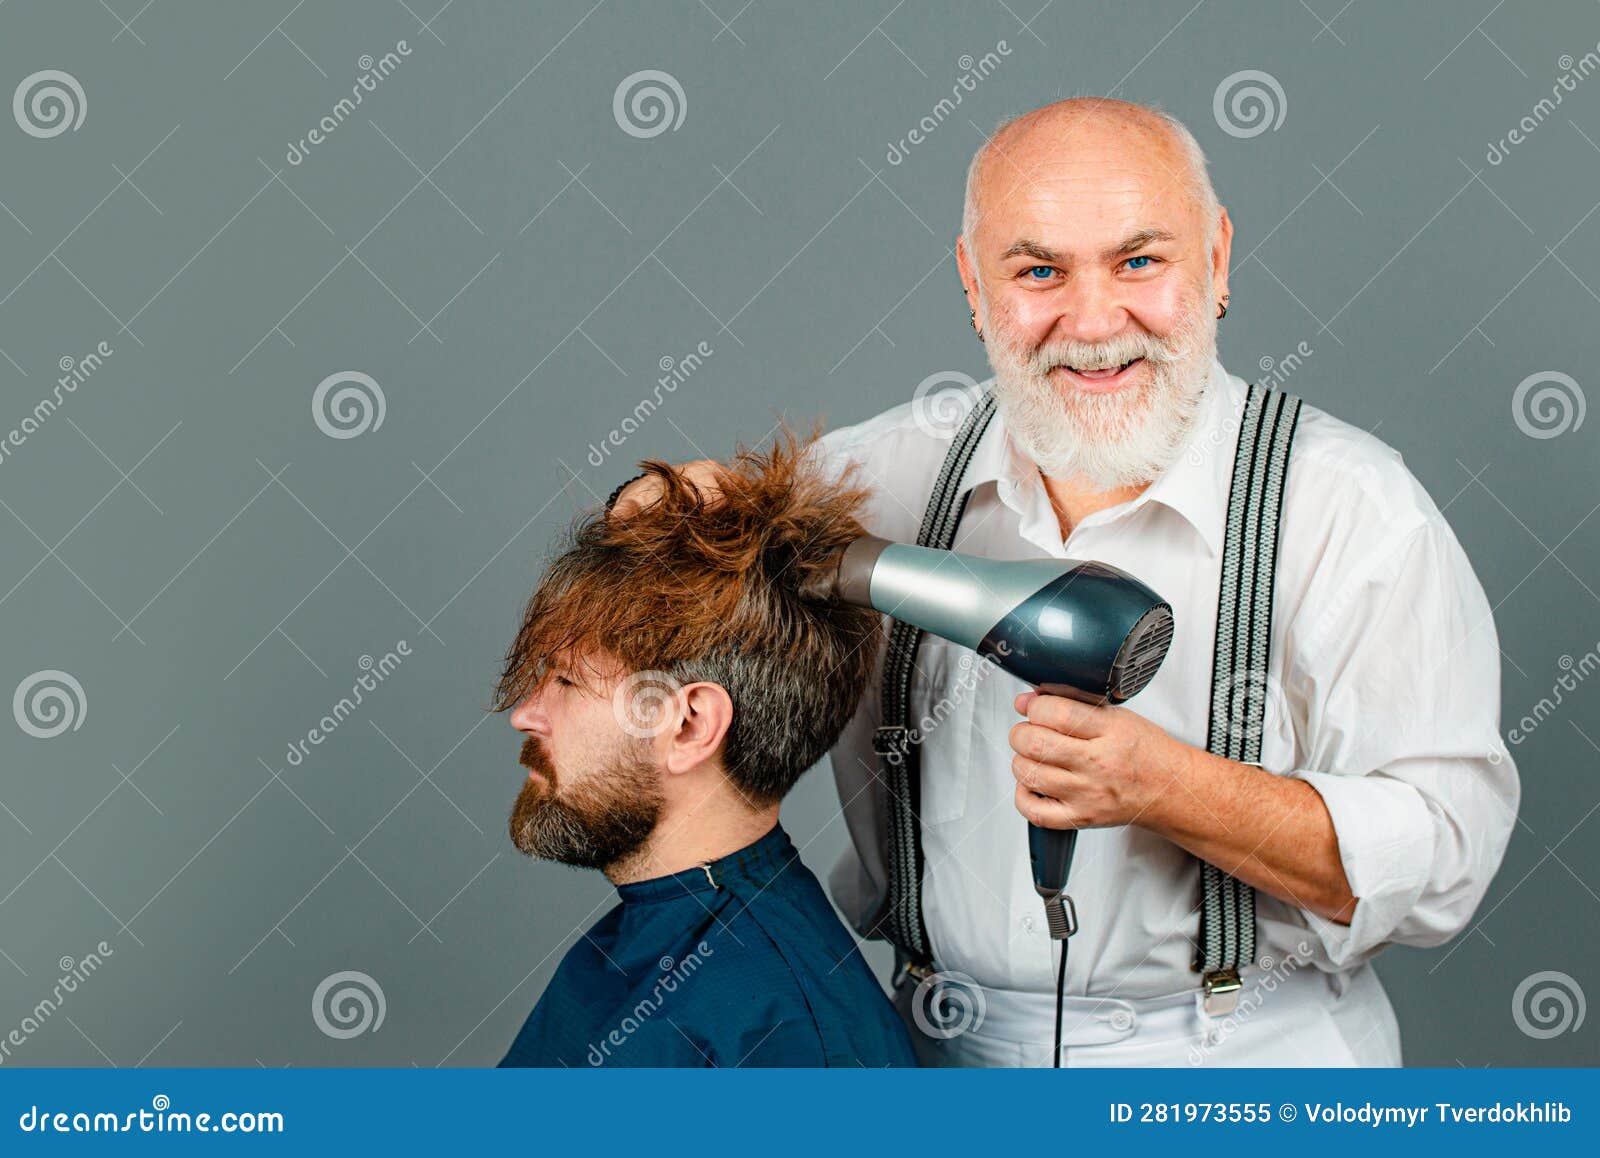 Bearded Man Getting Hairstyle by Hairdresser with Hair Dryer at Barbershop photo picture